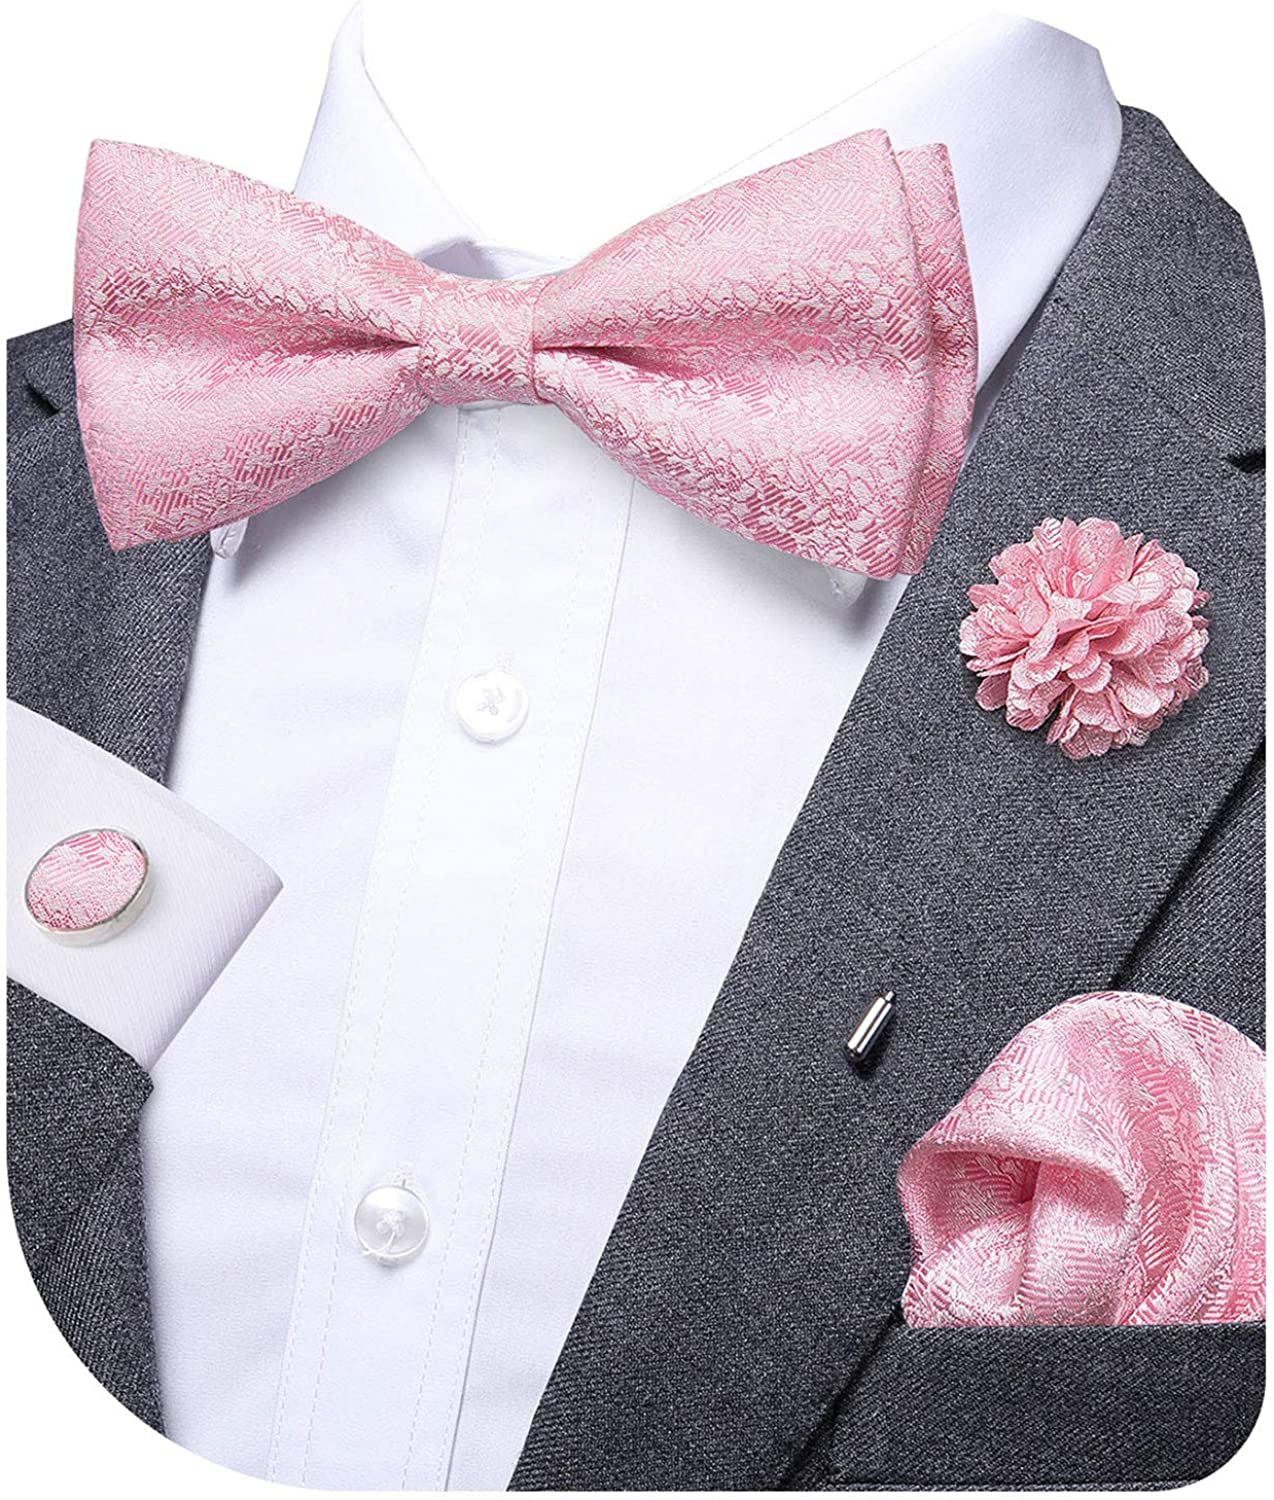 Dubulle Bow Tie and Lapel pin Set with Pocket Square Cufflinks